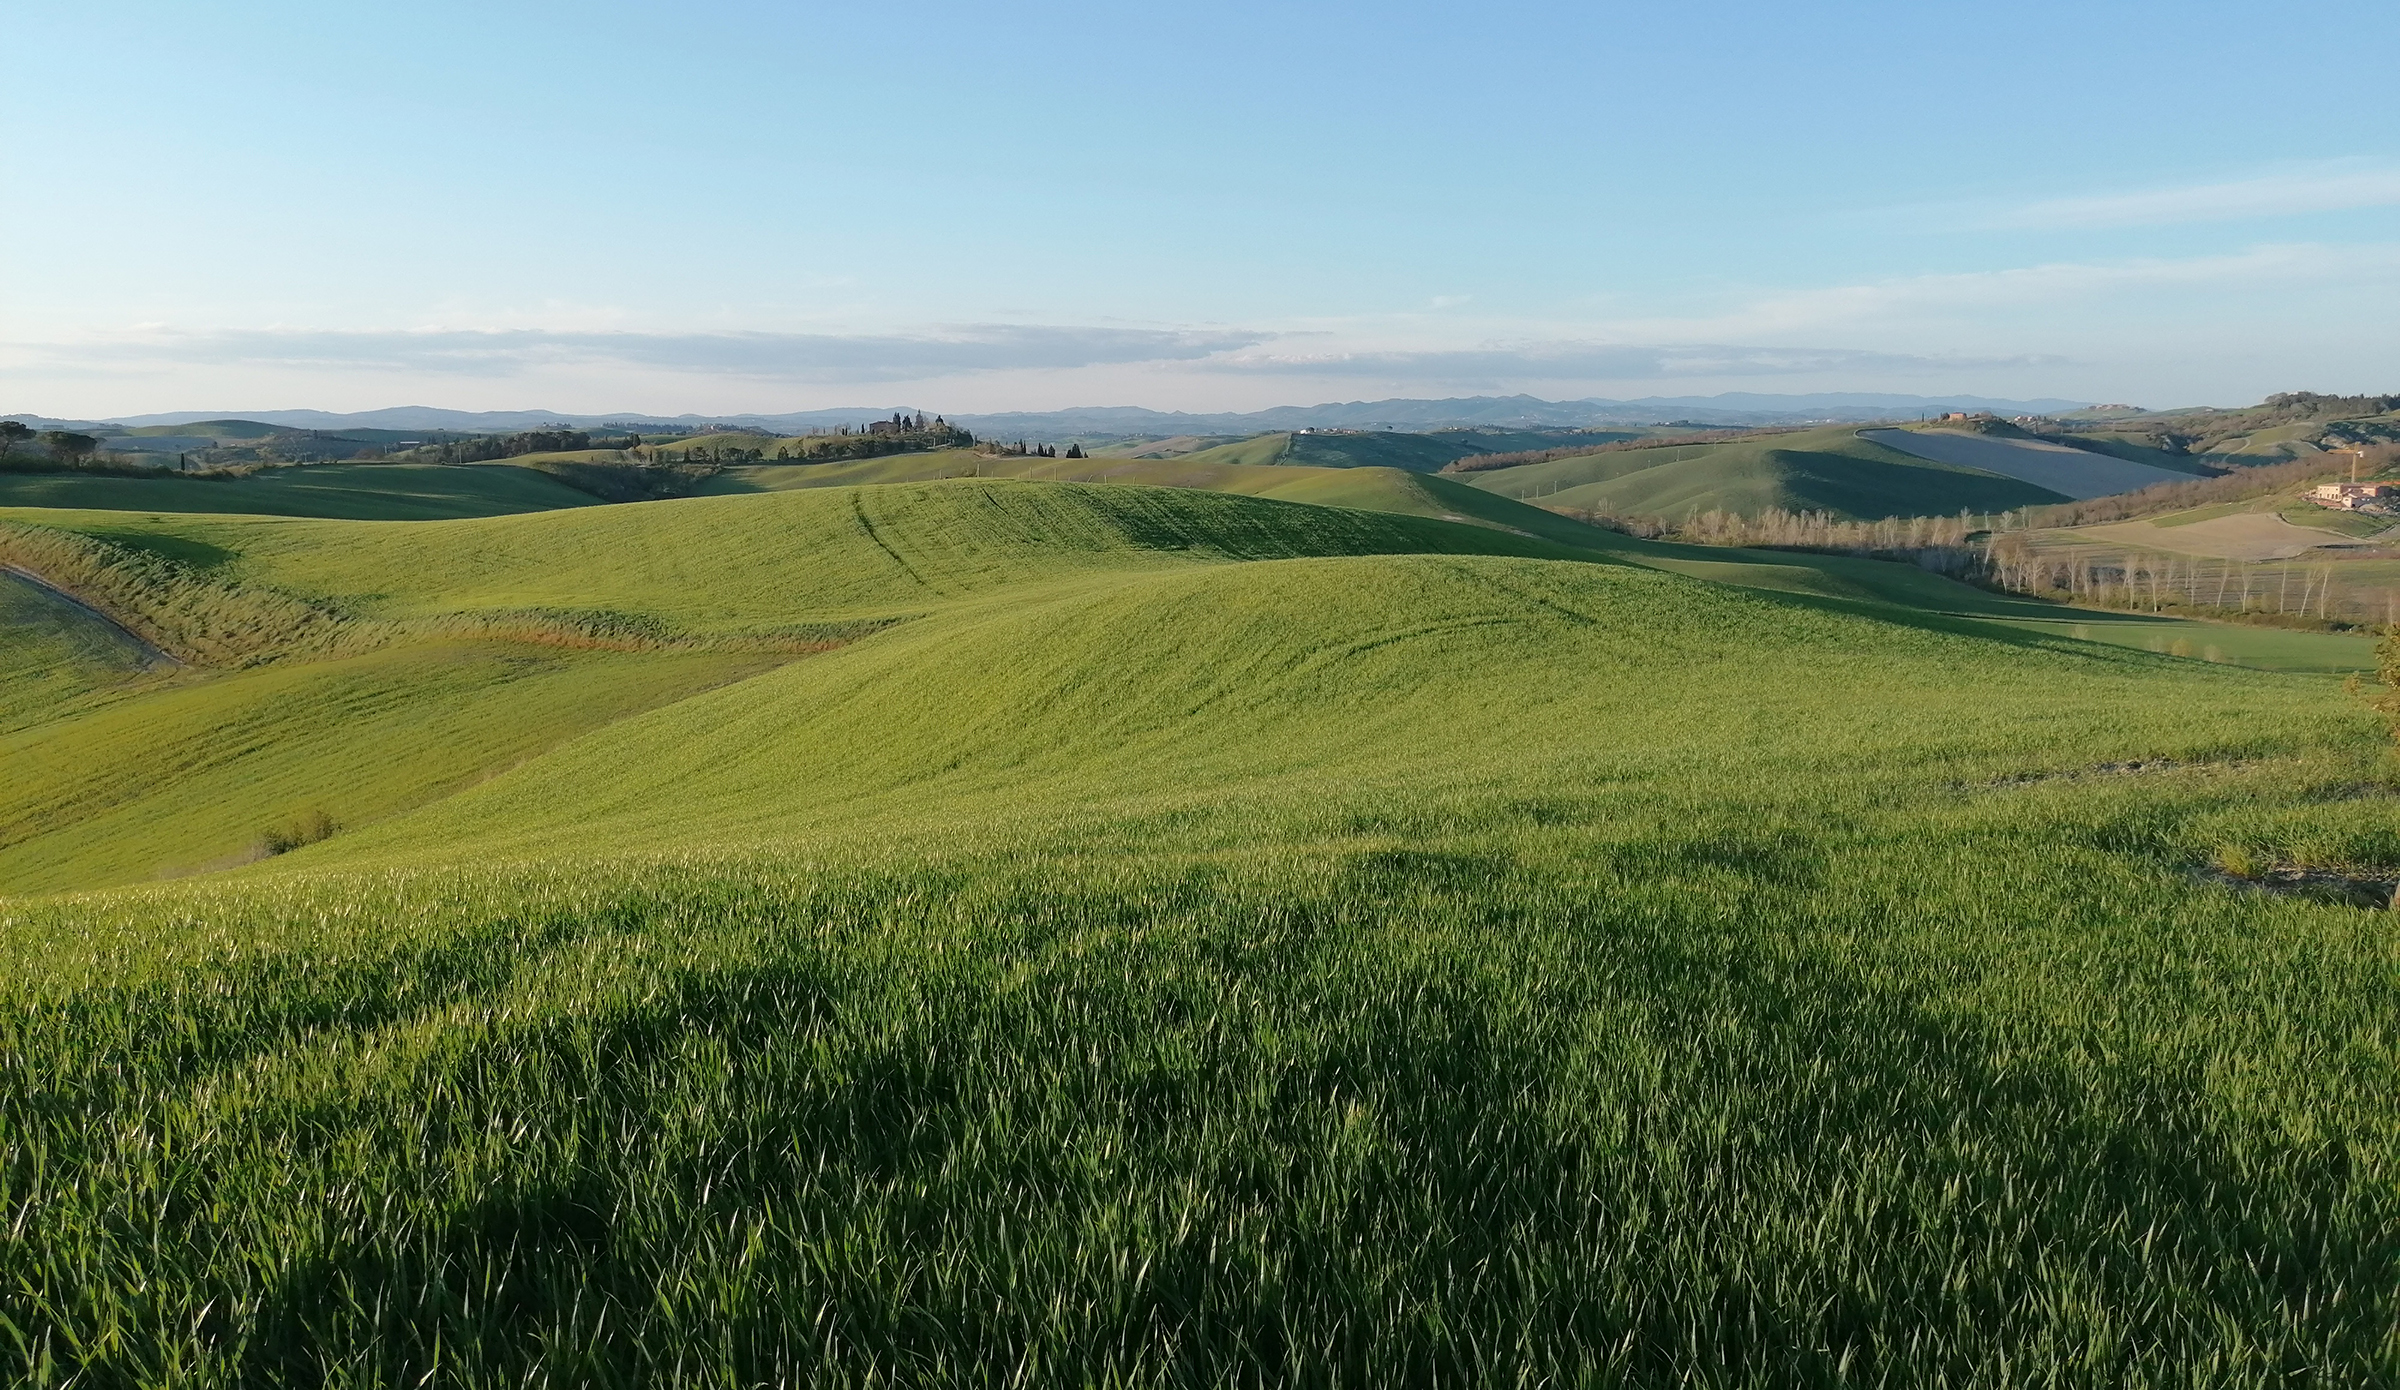 Countryside in Tuscany, landscape with hills